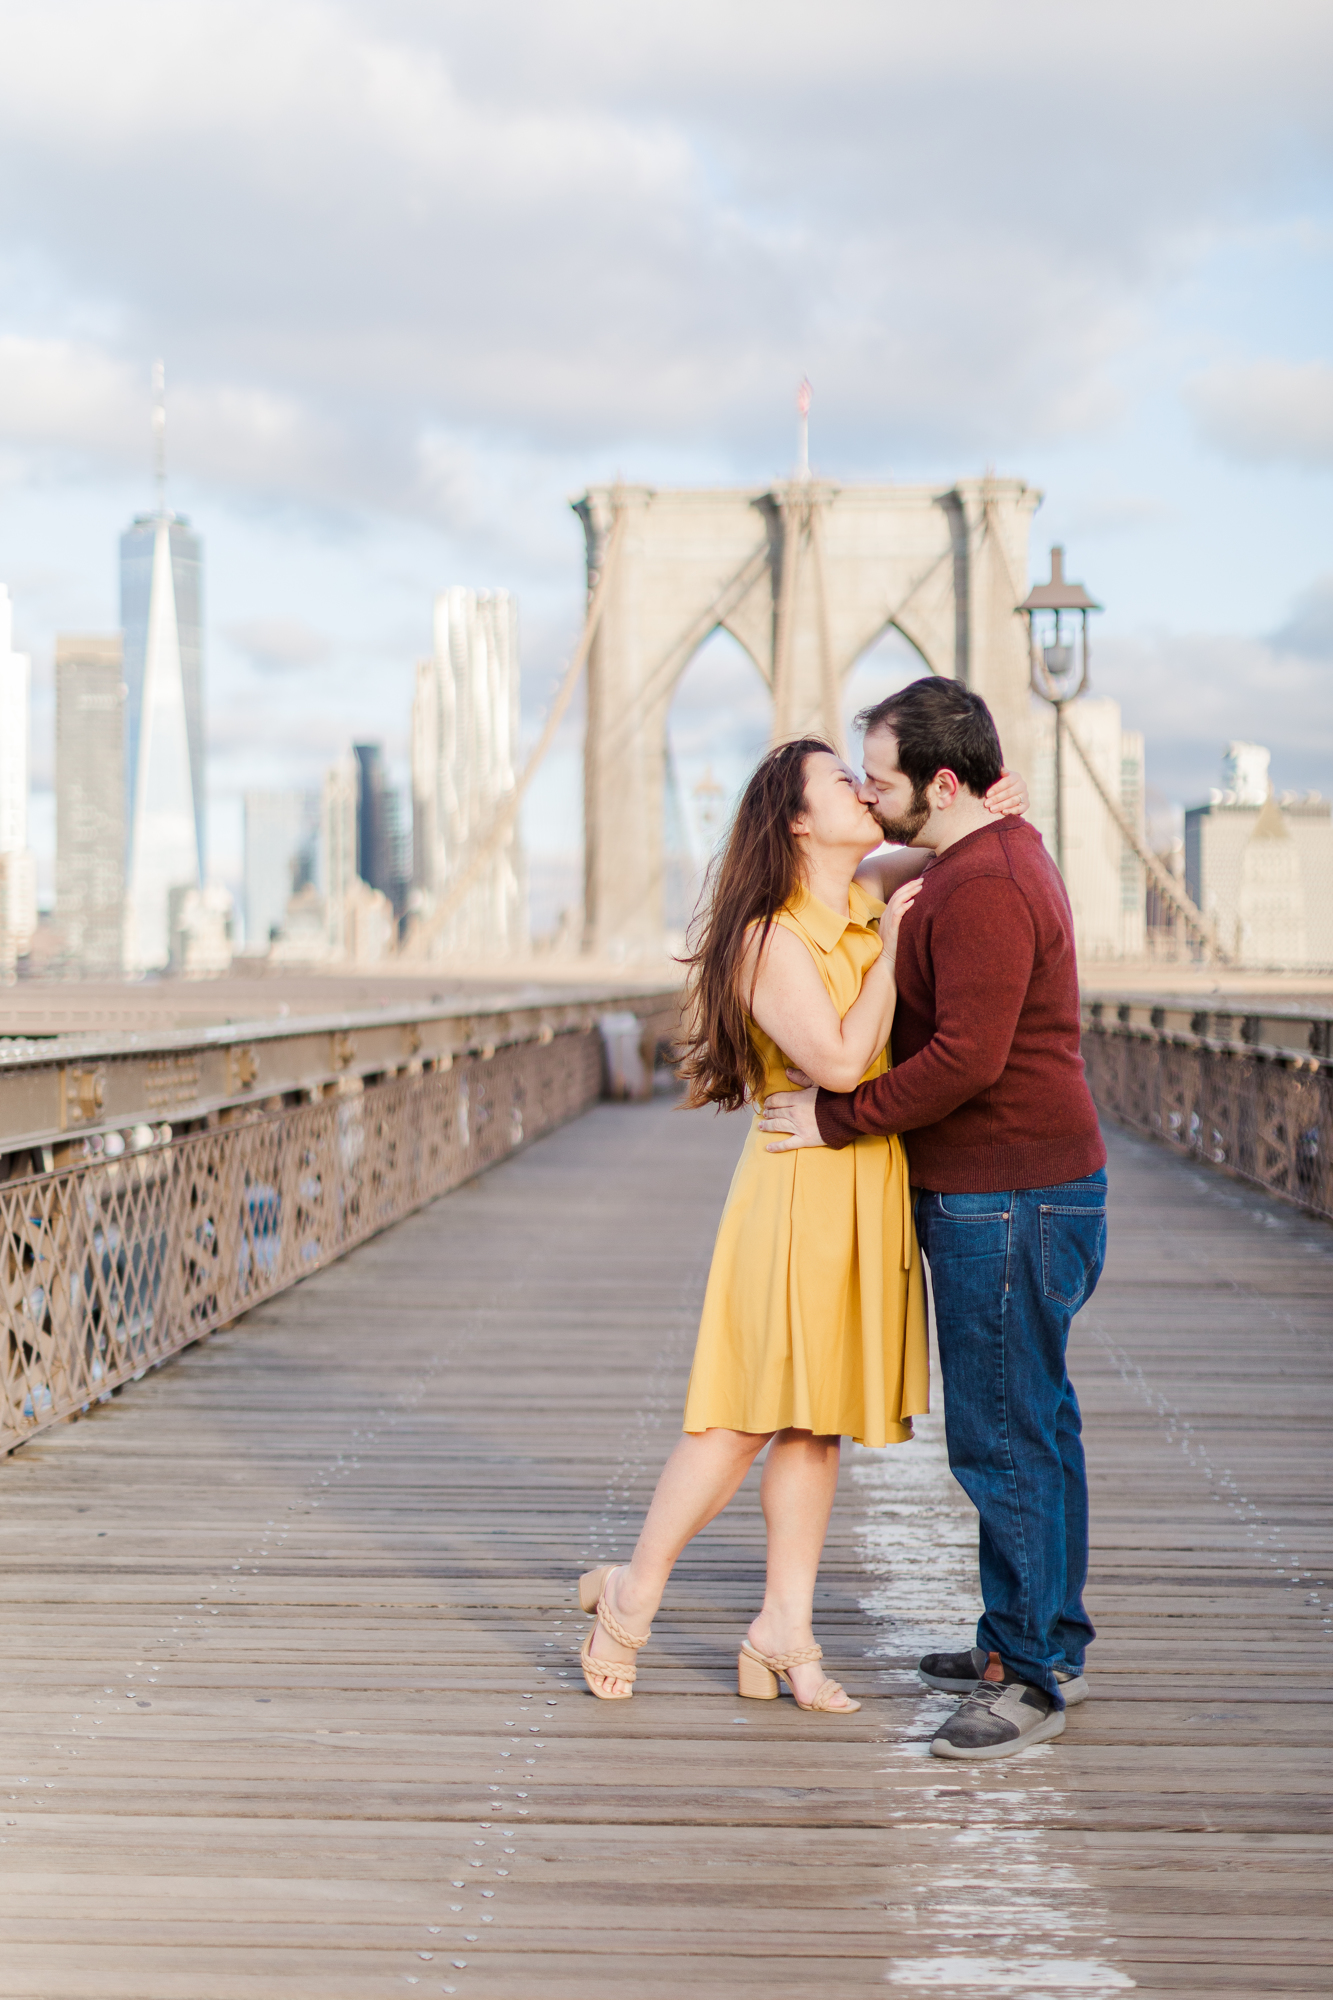 Breathtaking Brooklyn Bridge Engagement Photography with Matching Outfits